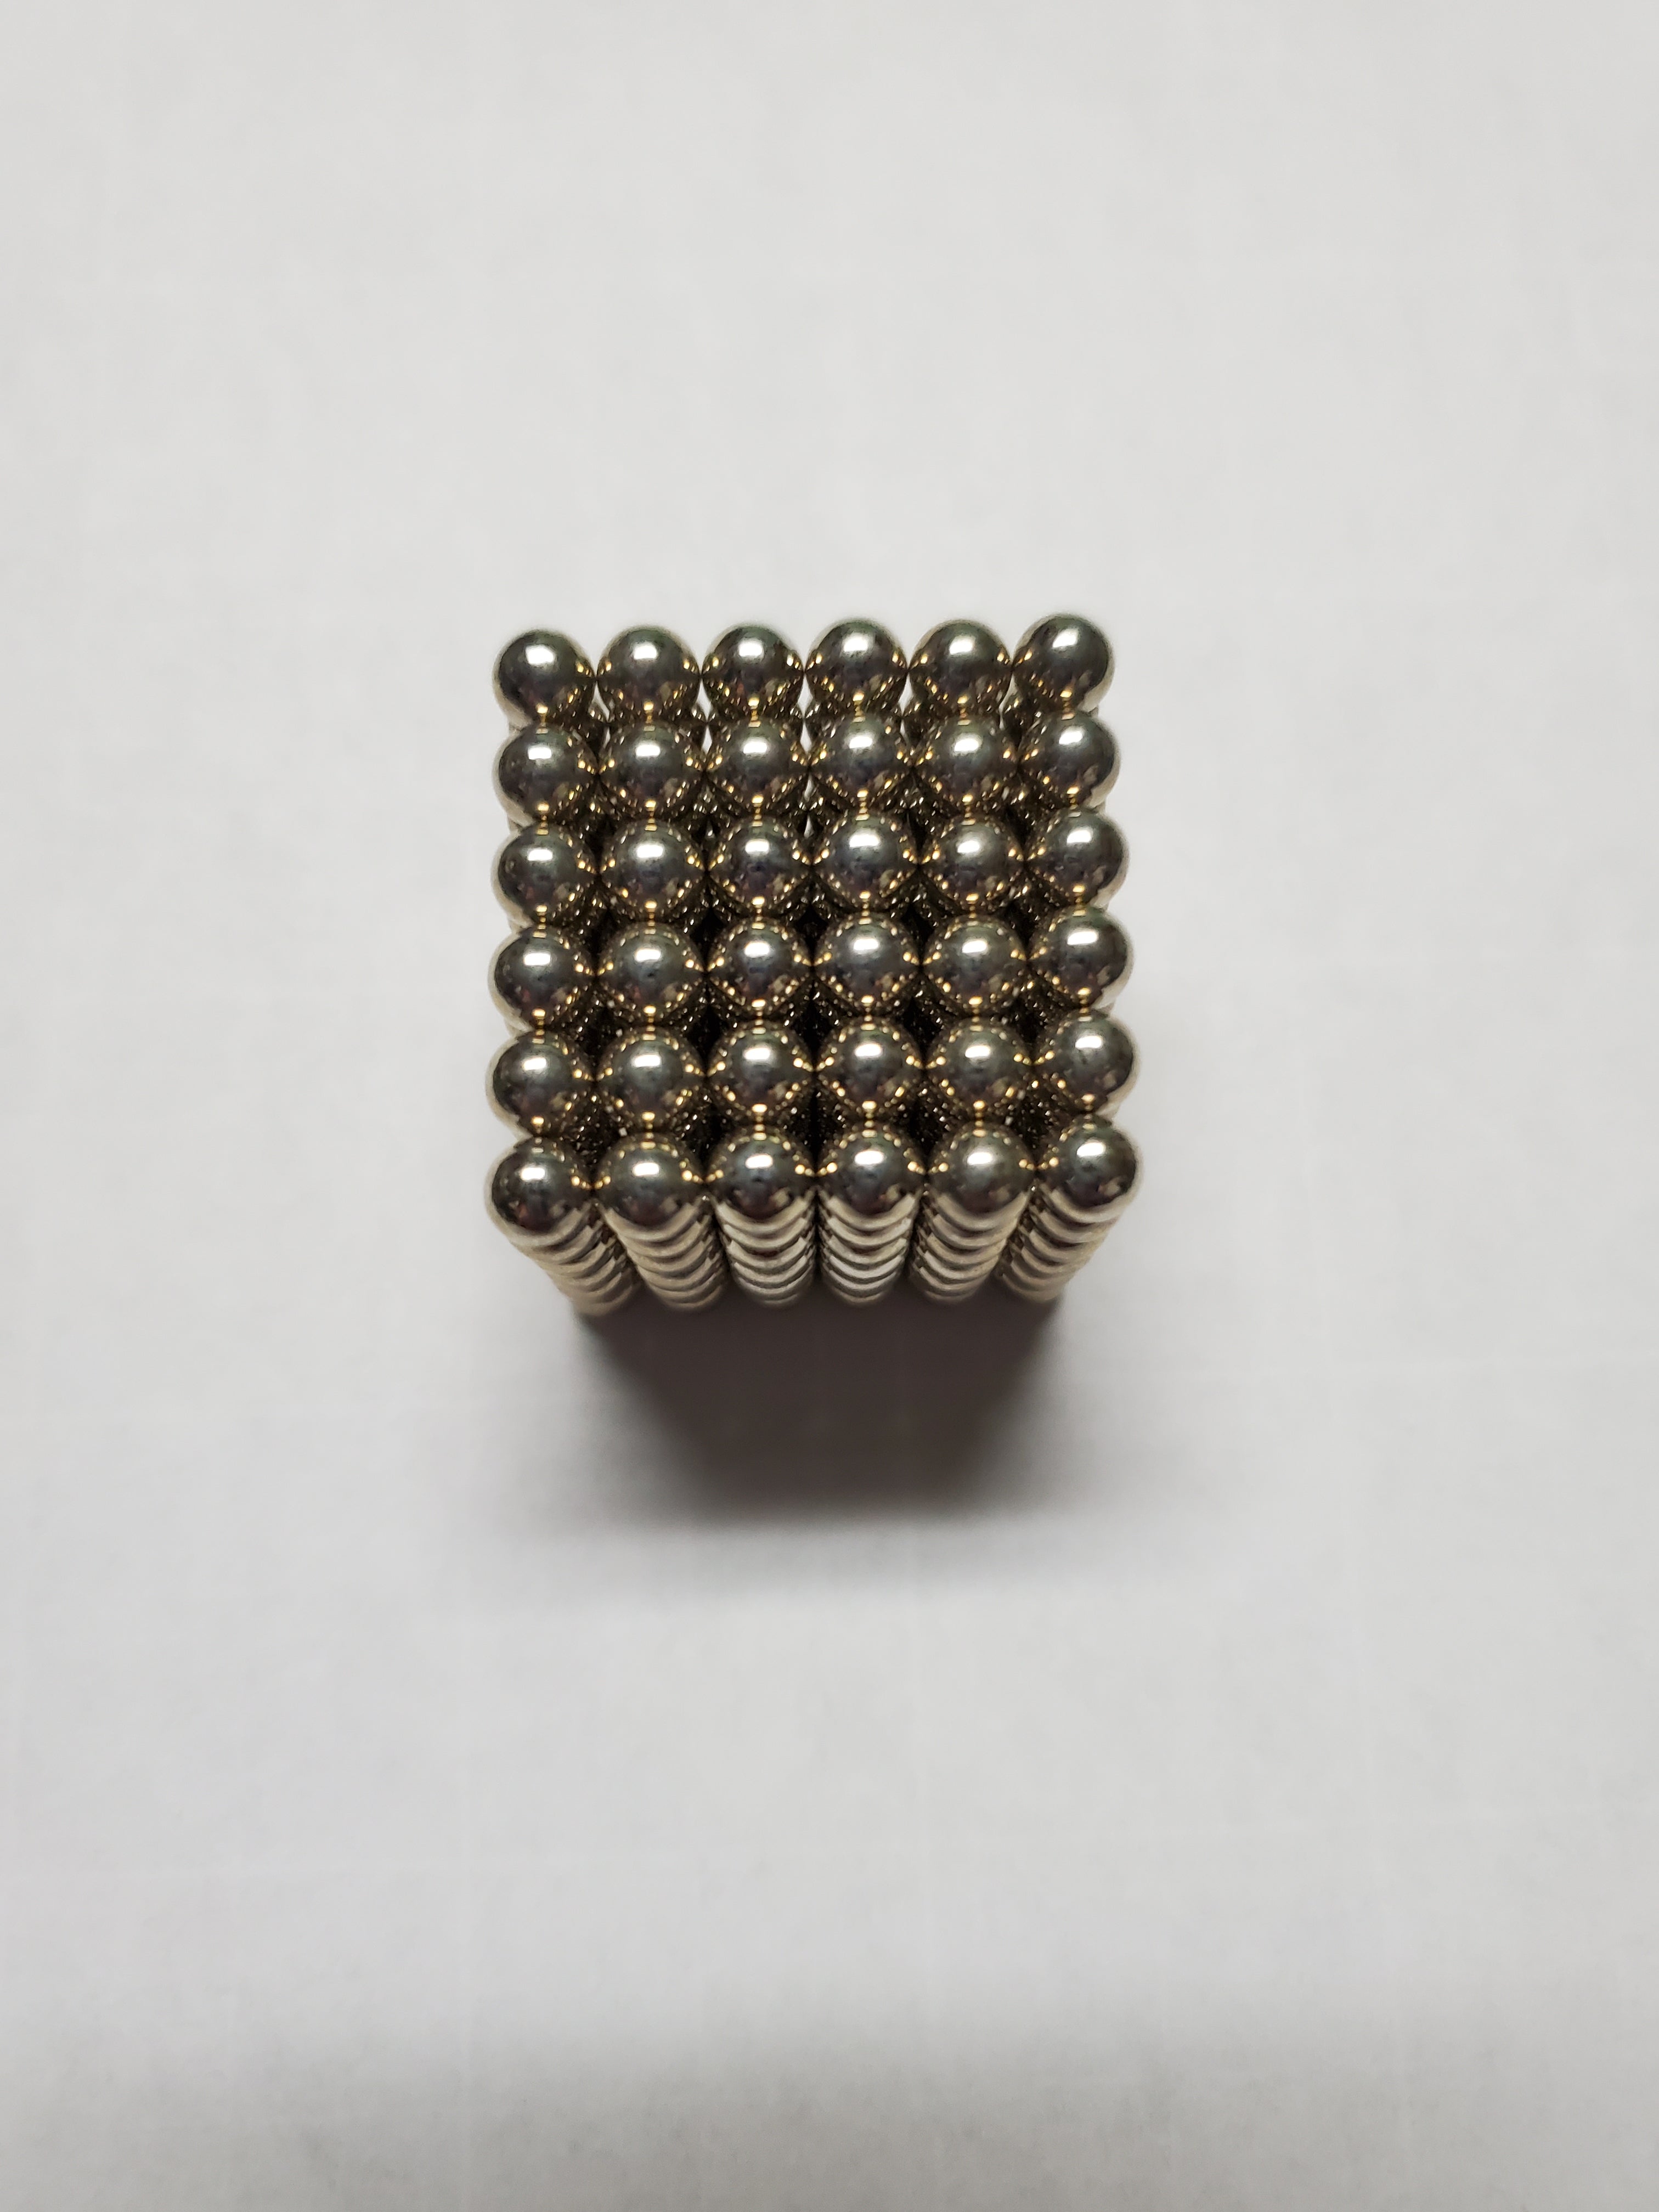 5mm (13/64) round spheres / balls 25 / 50 / 100 / 250 pcs STRONG MAGNETS -  N35